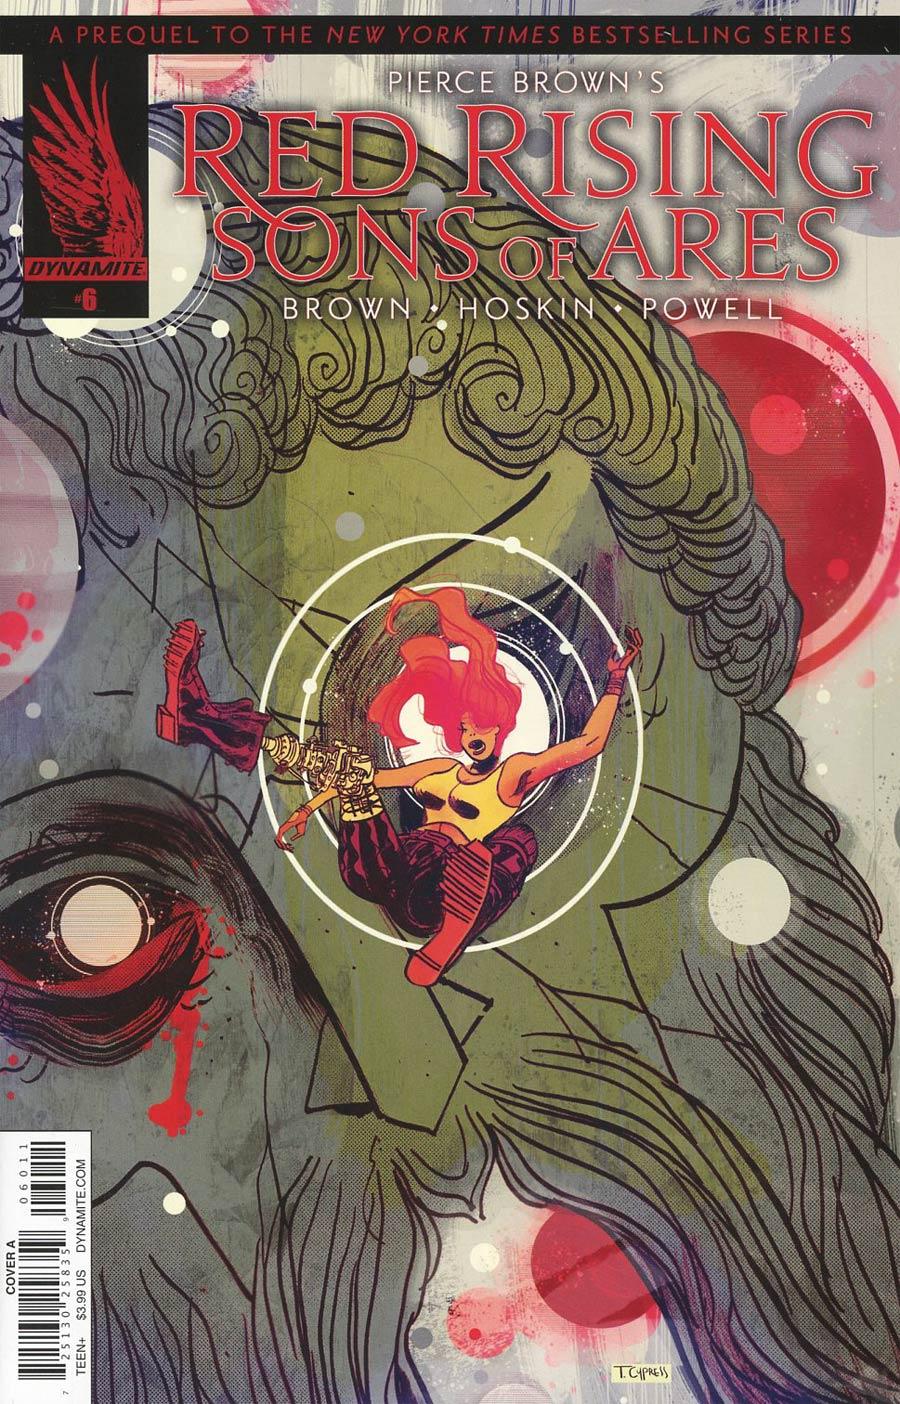 Pierce Browns Red Rising Sons Of Ares Vol. 1 #6